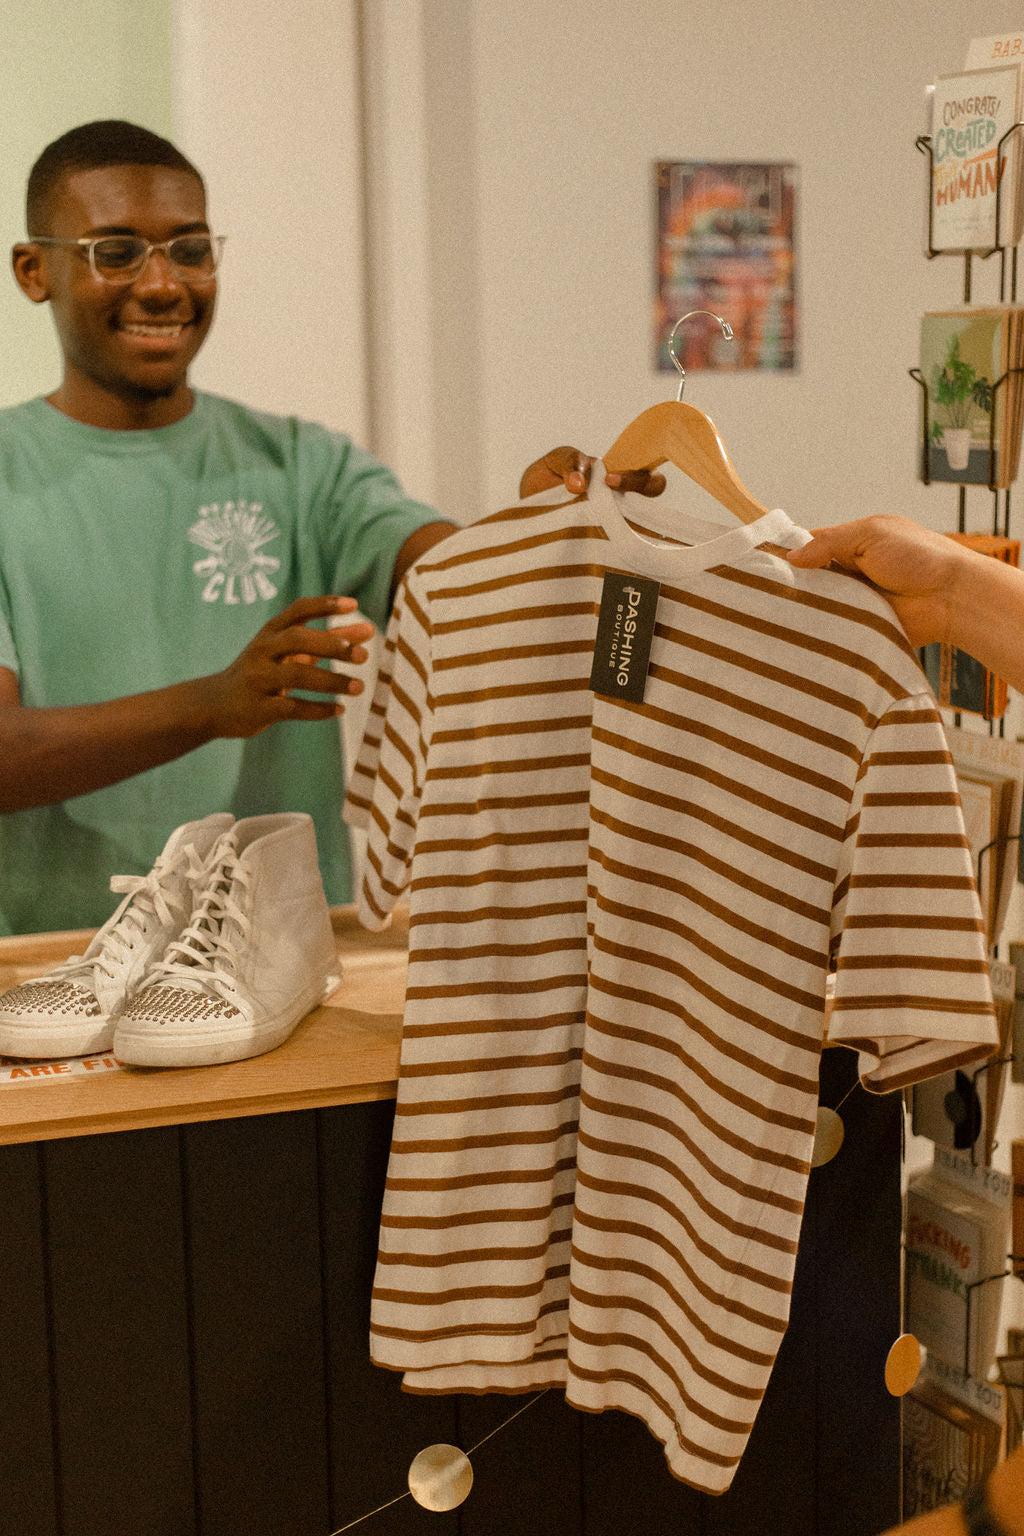 Top 5 Clothing Consignment Shops in Charlottesville - Charlottesville Guide